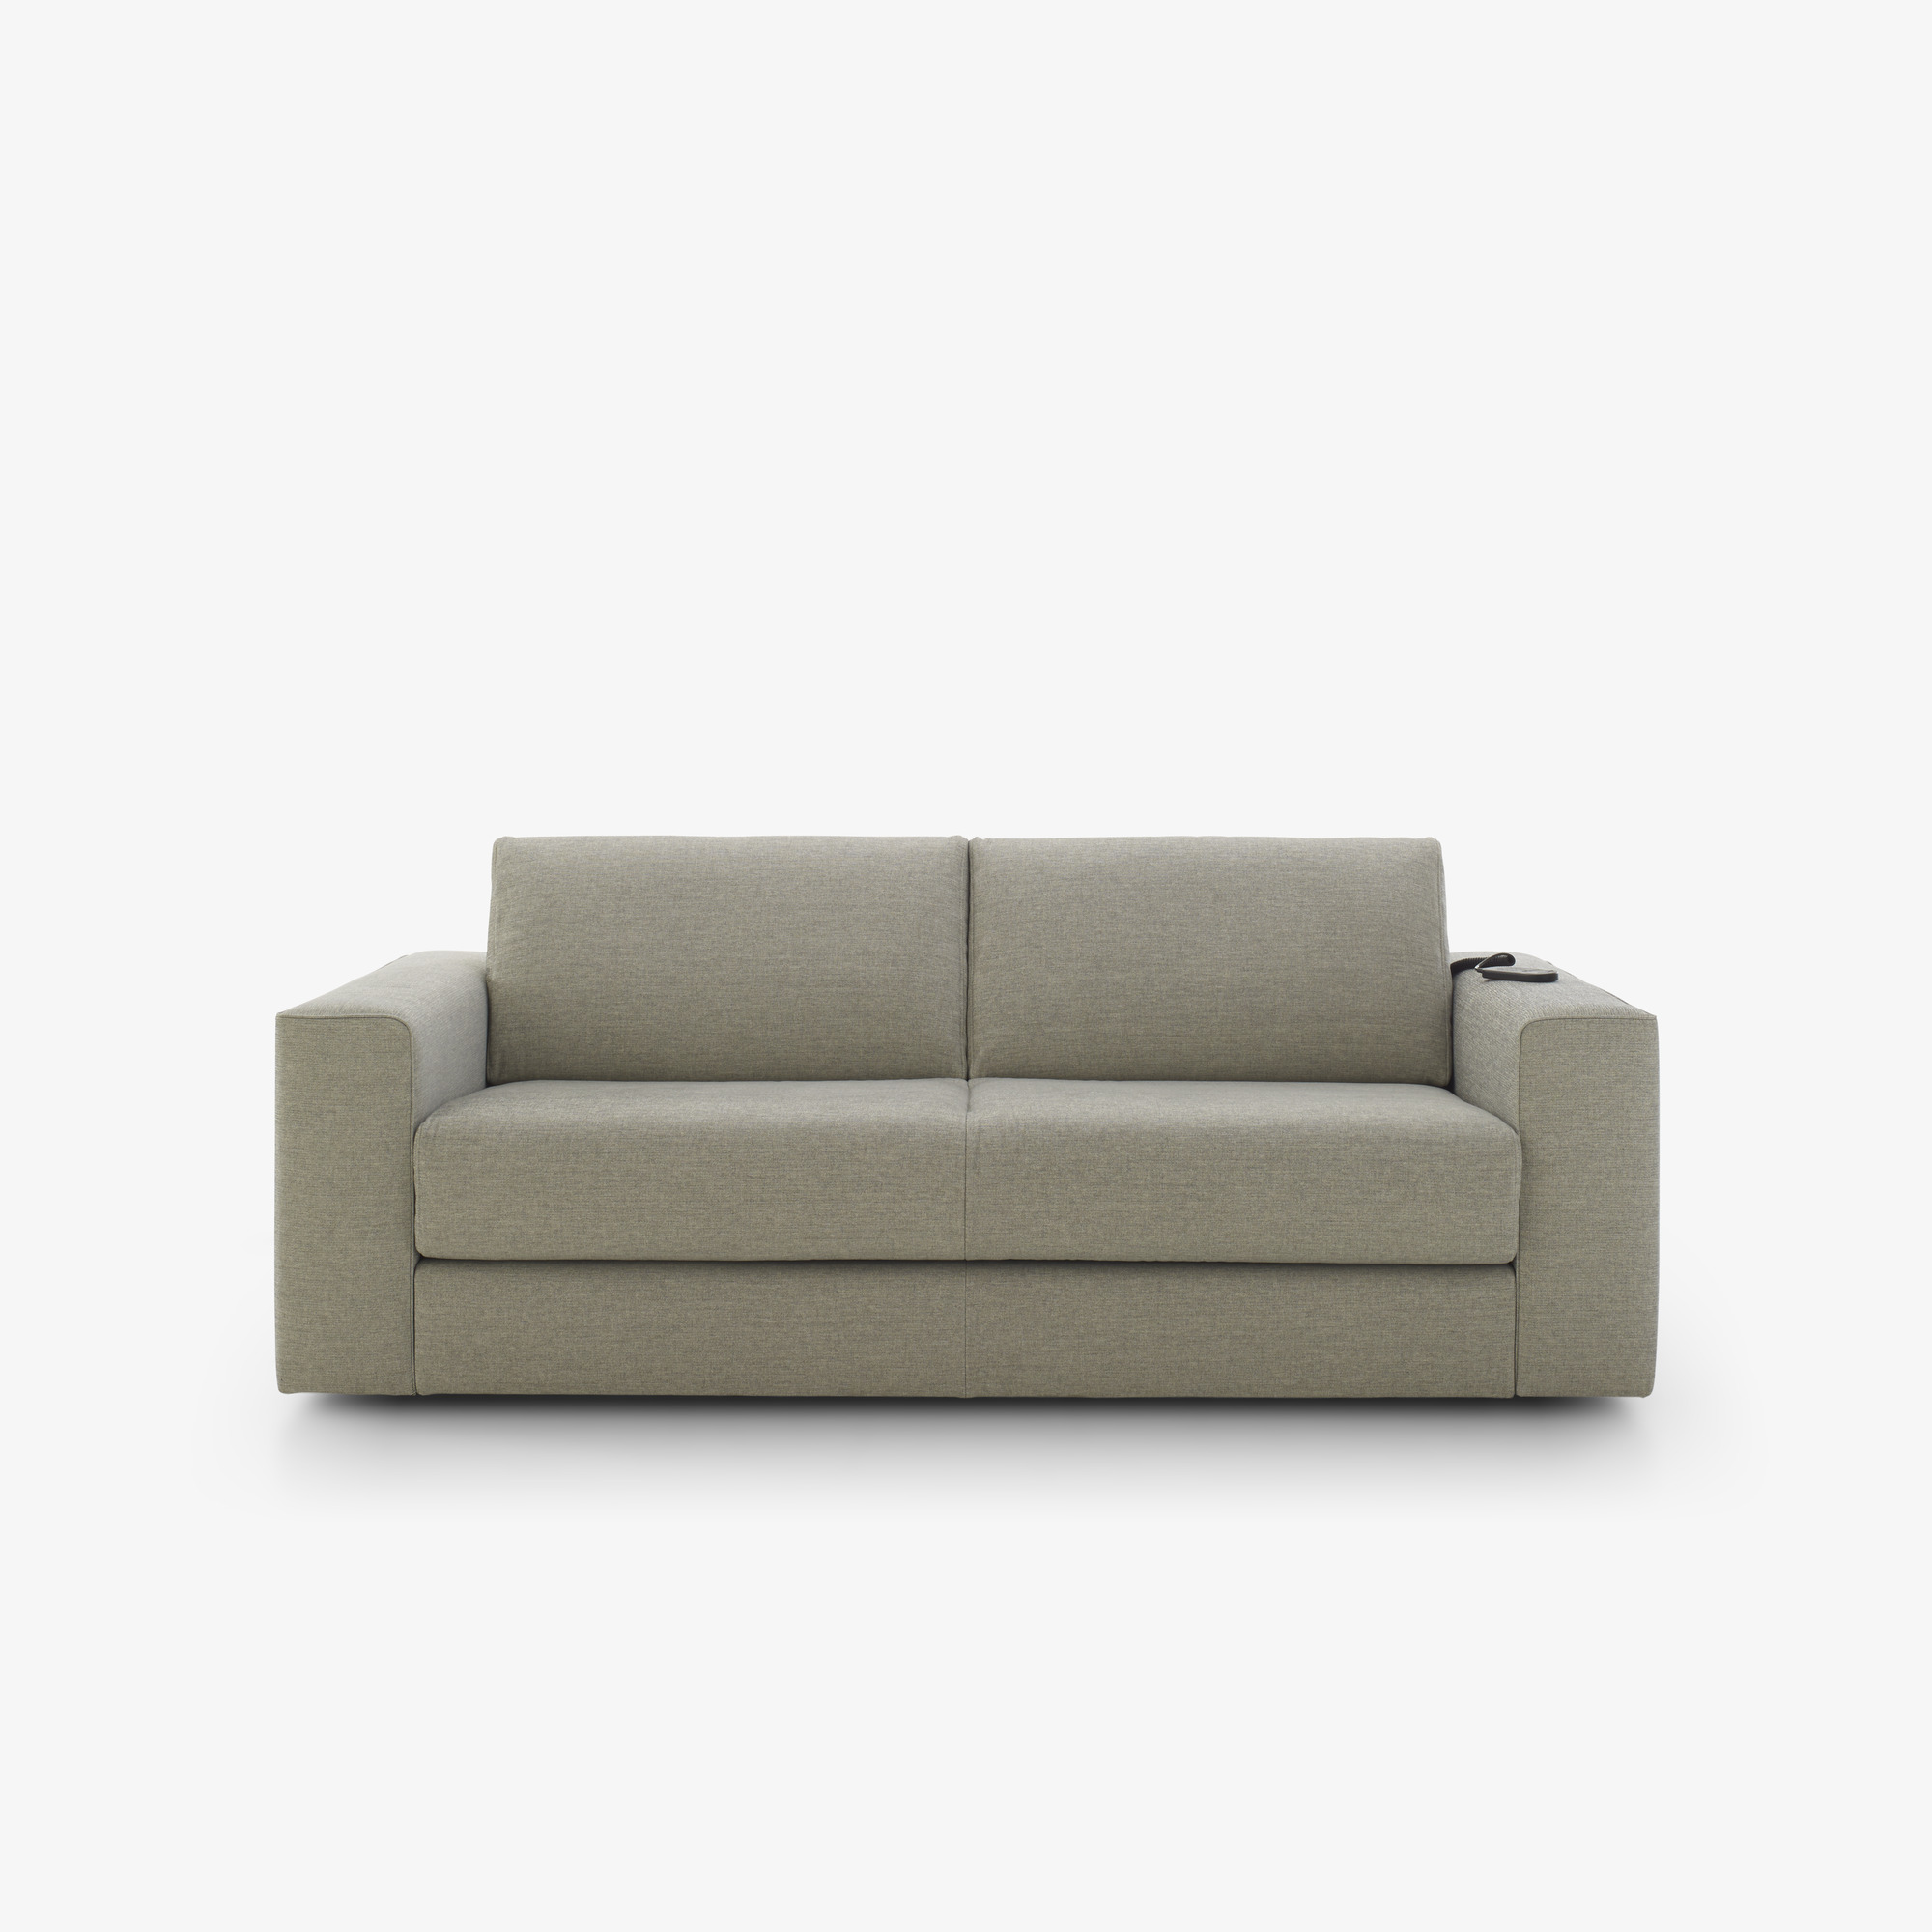 Image BED SETTEE WITH 2 ARMS